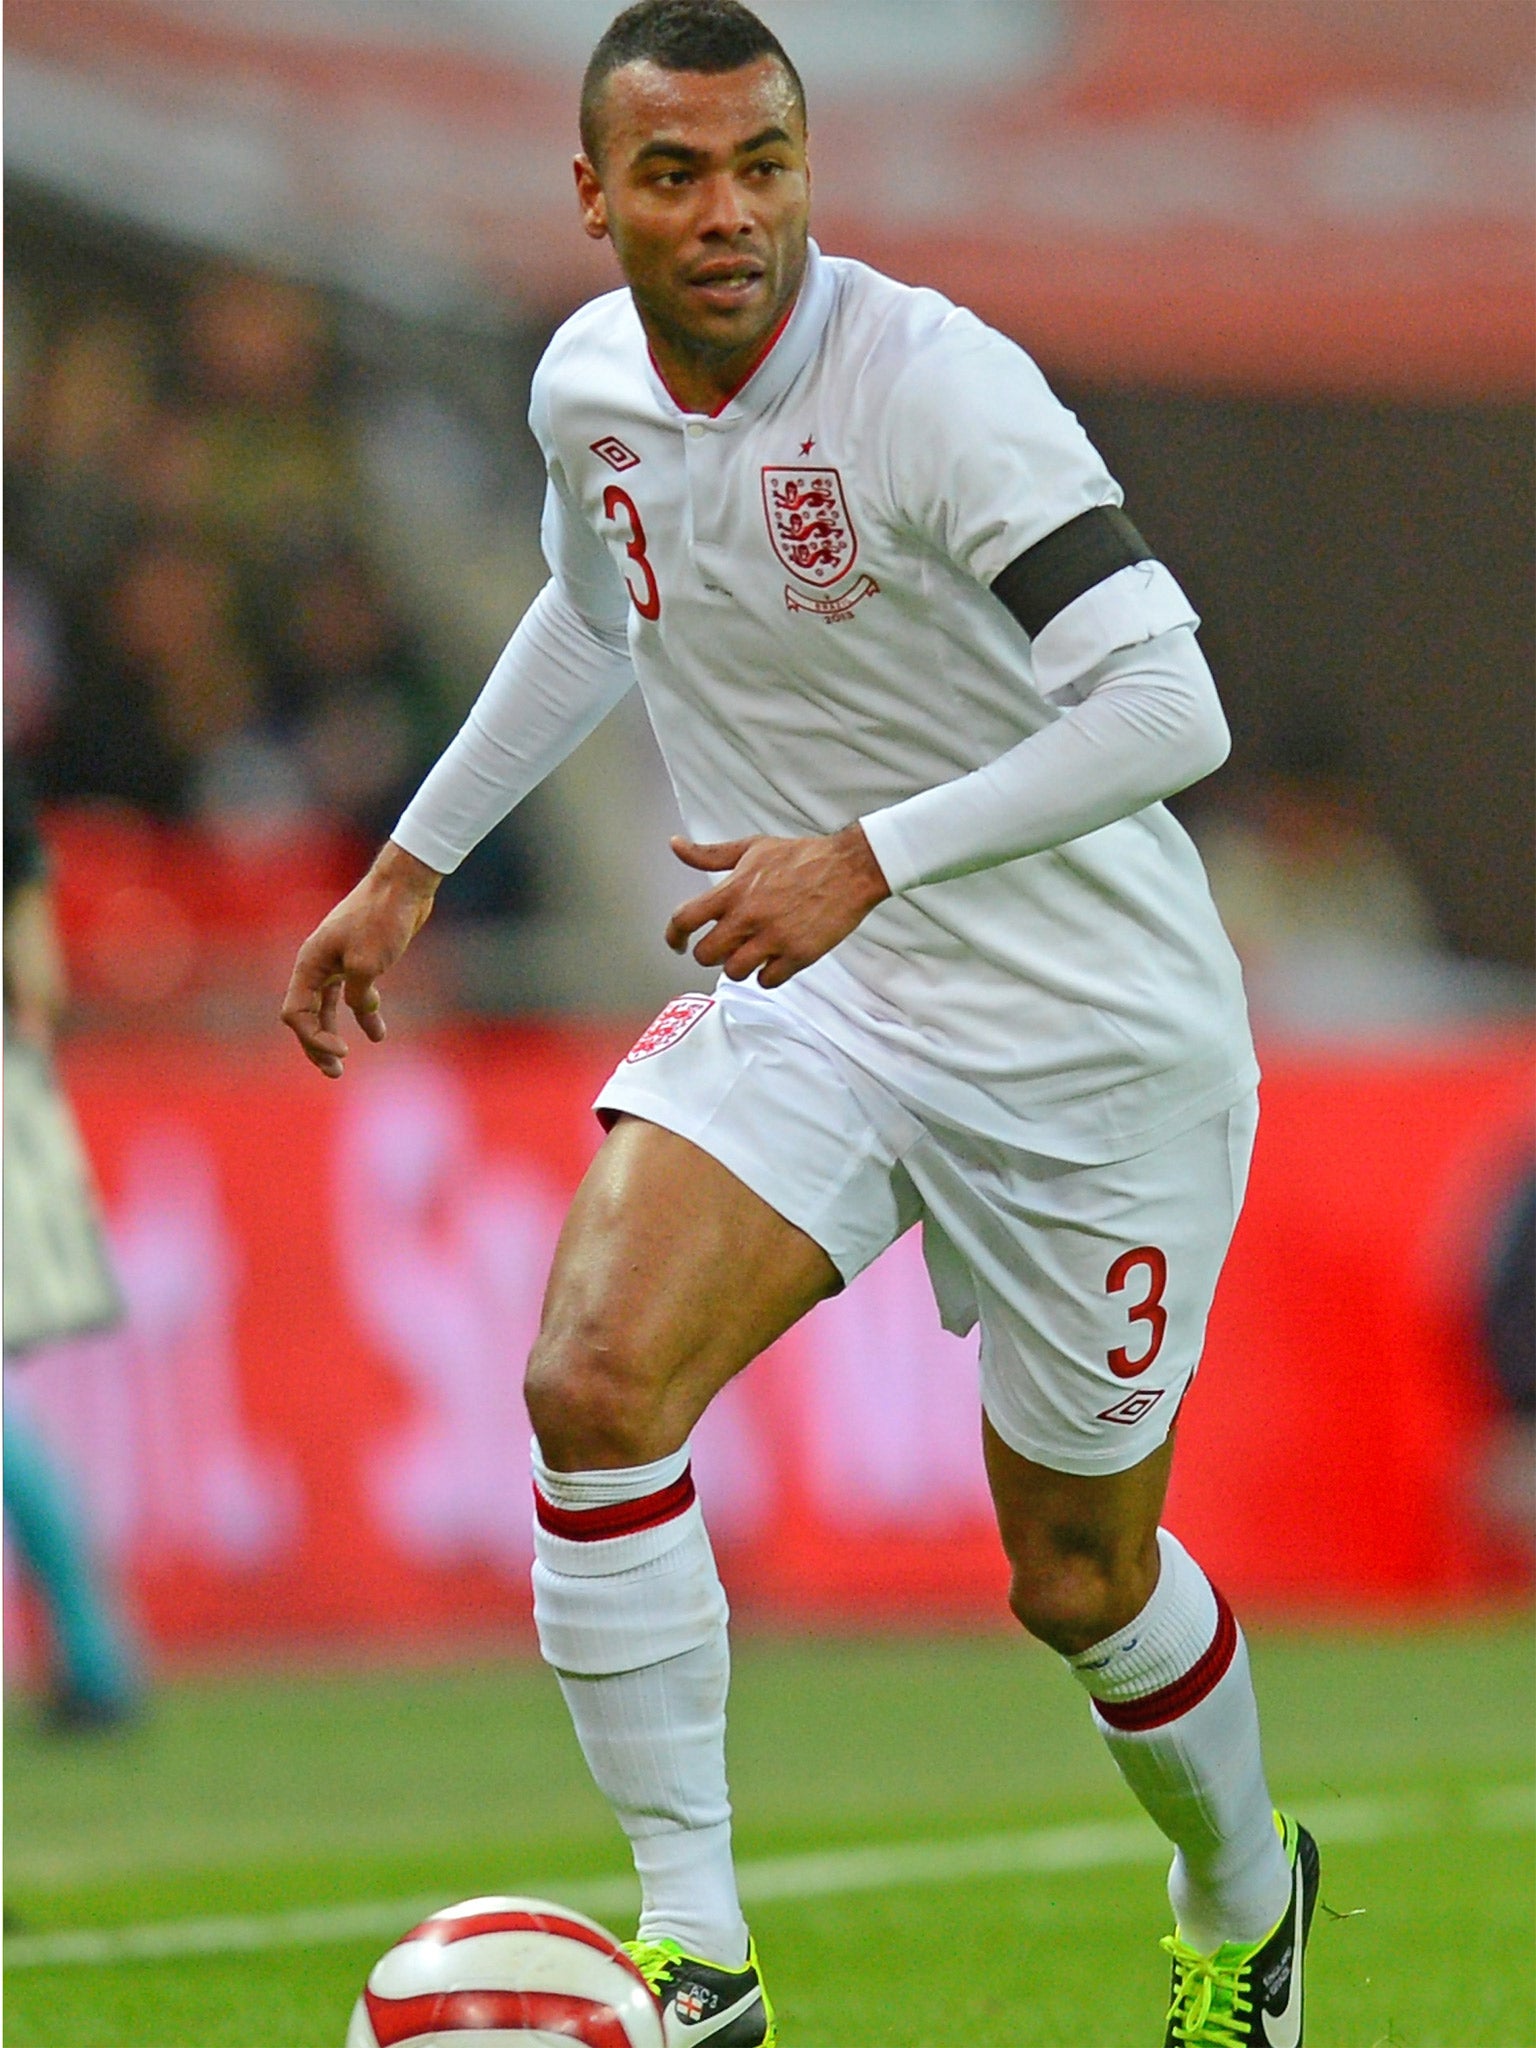 Ashley Cole reached his 100th cap last night